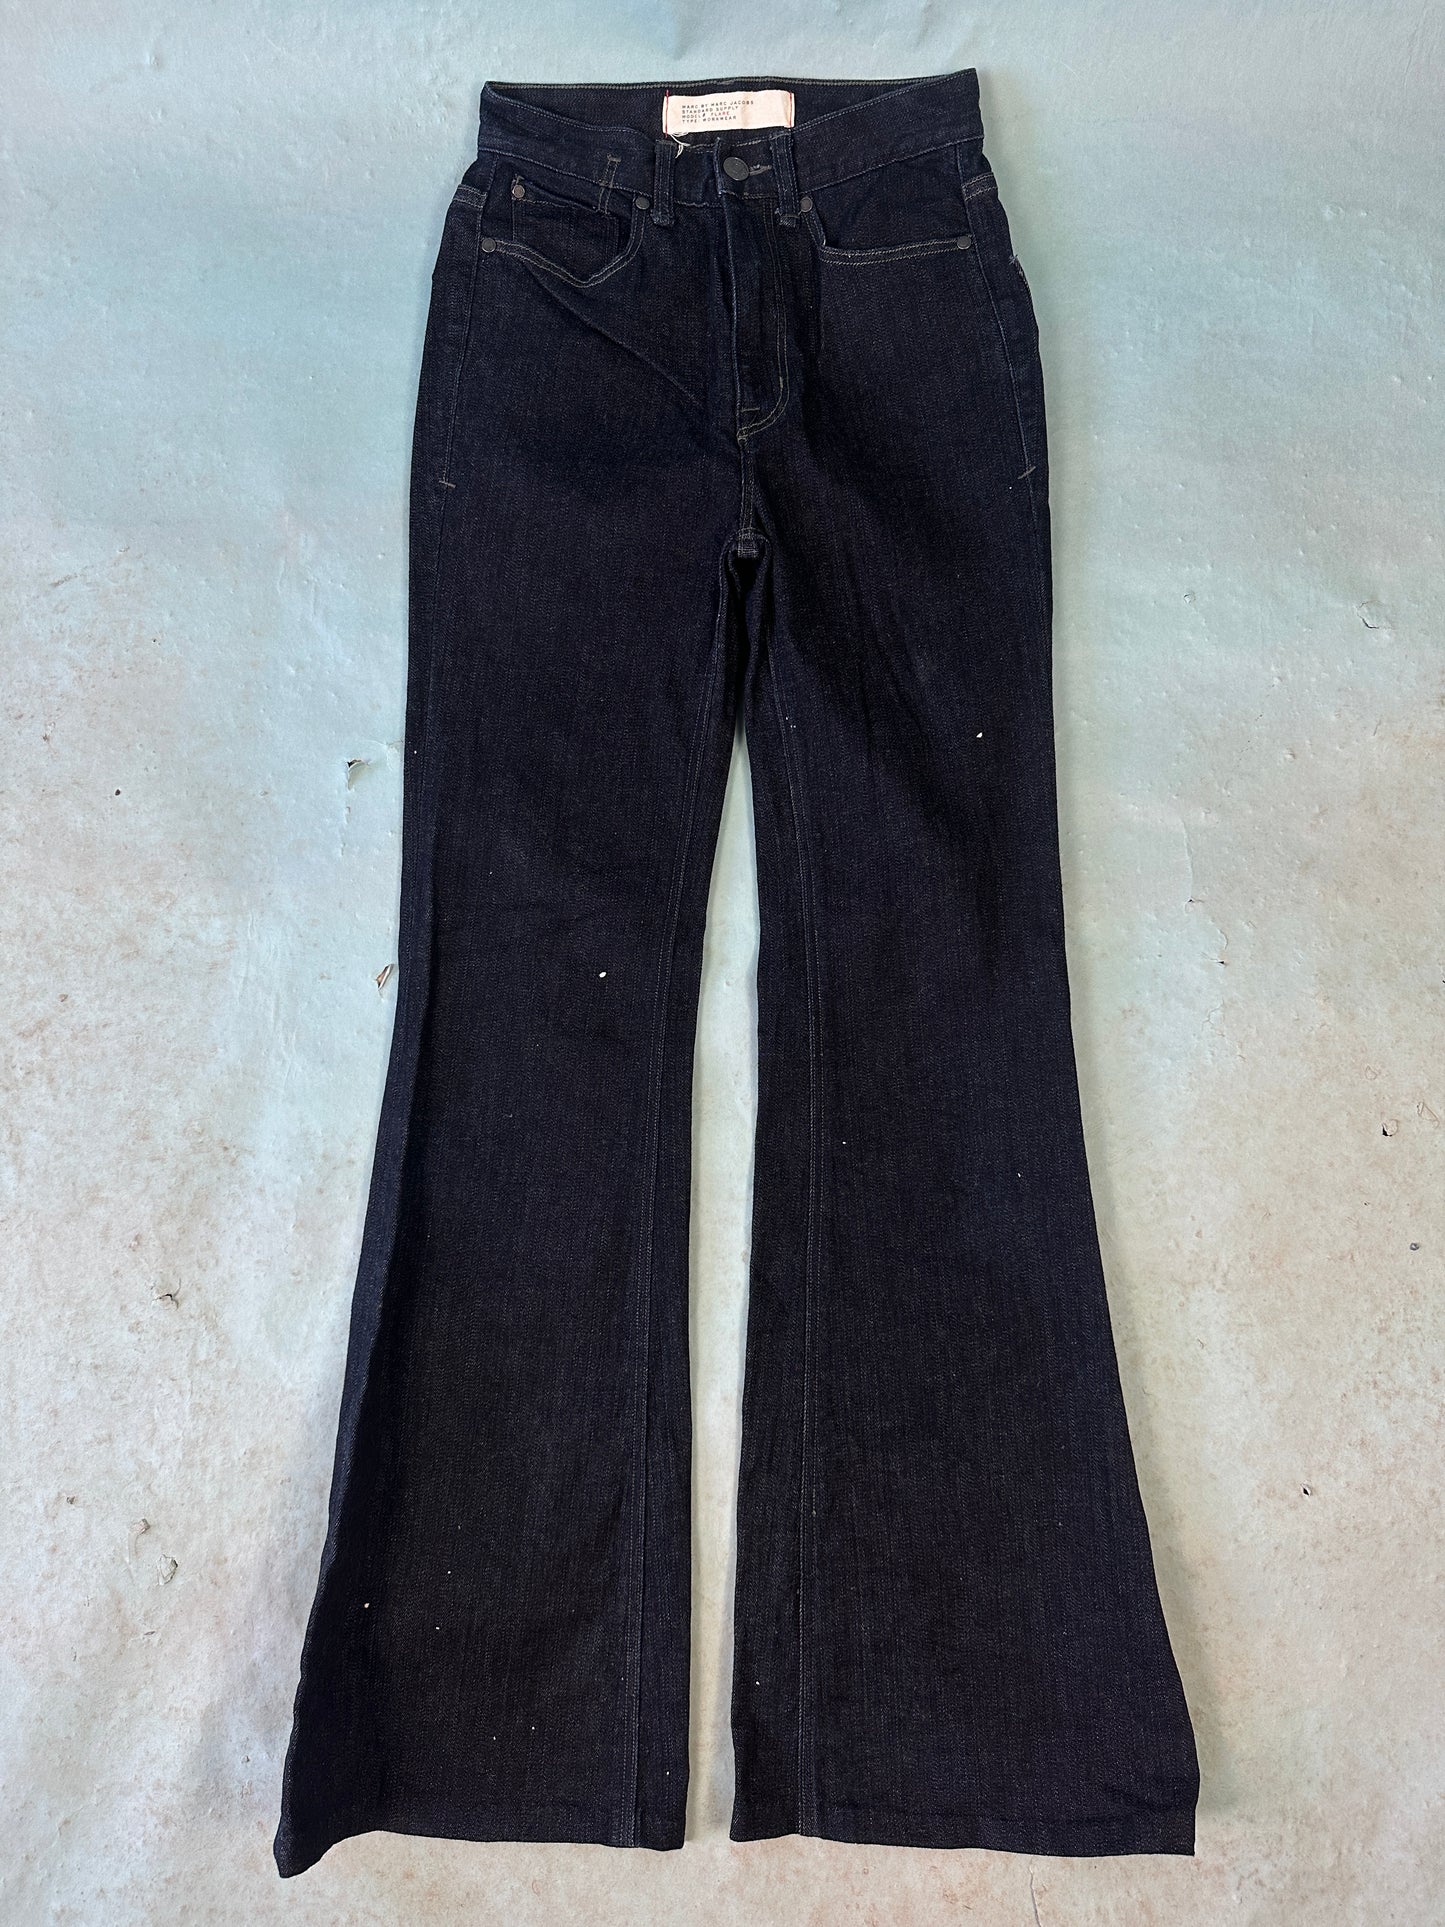 Marc Jacobs Flair Workwear Jeans - 24